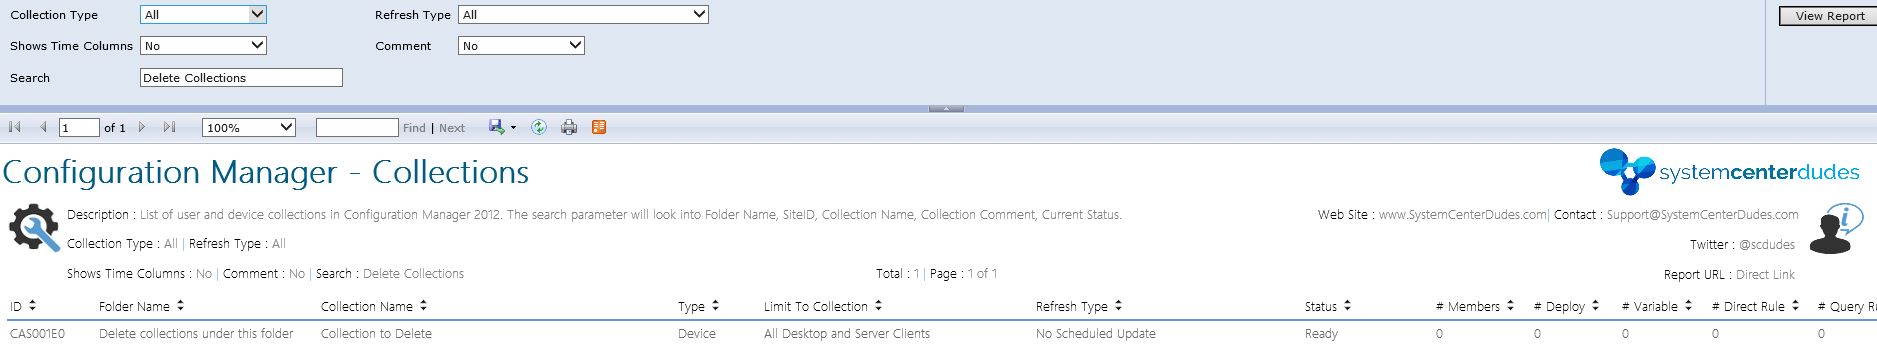 Powershell script to delete older collections in a folder in SCCM